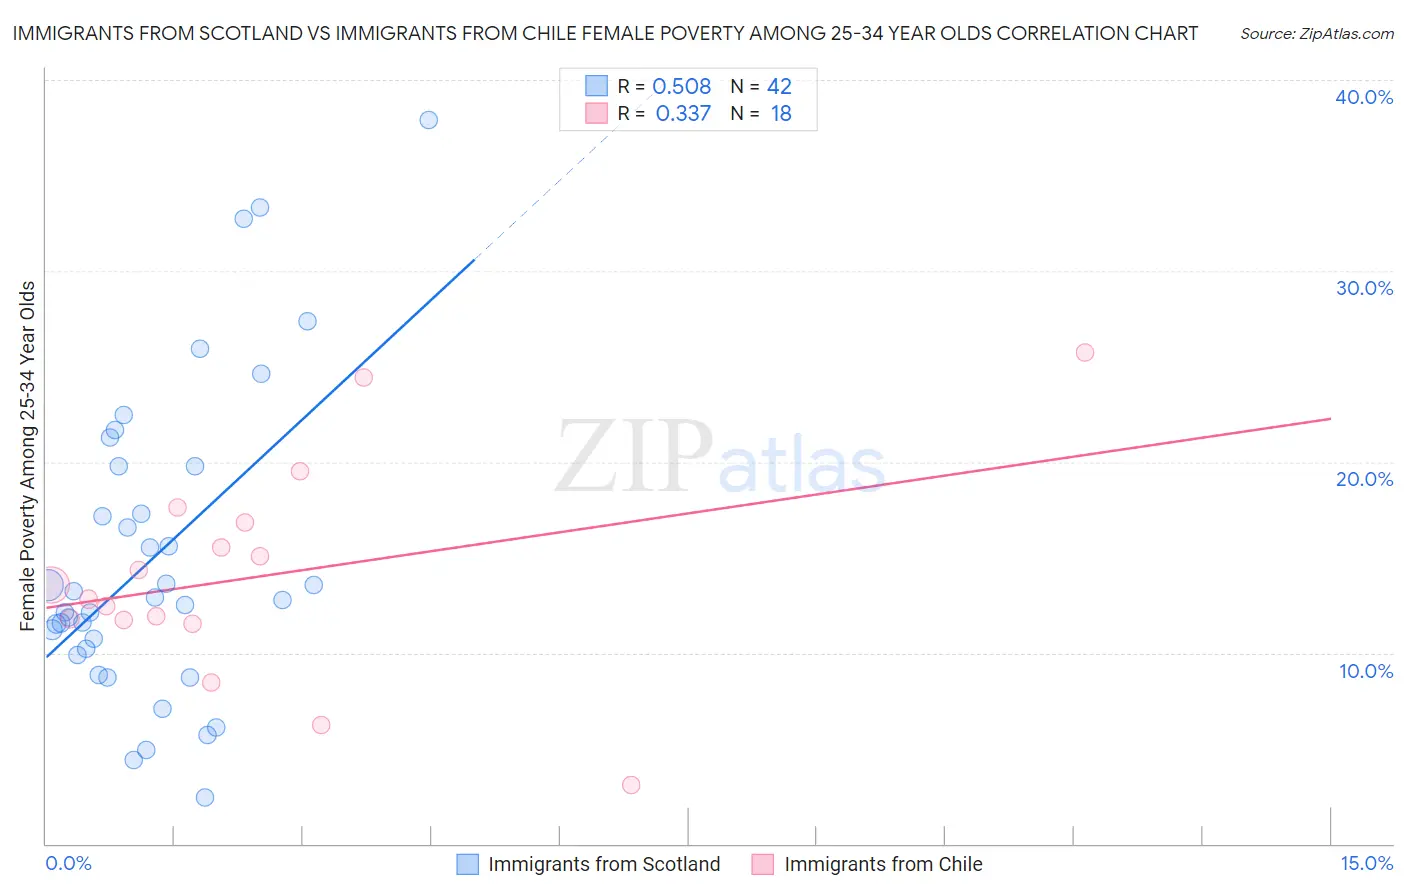 Immigrants from Scotland vs Immigrants from Chile Female Poverty Among 25-34 Year Olds